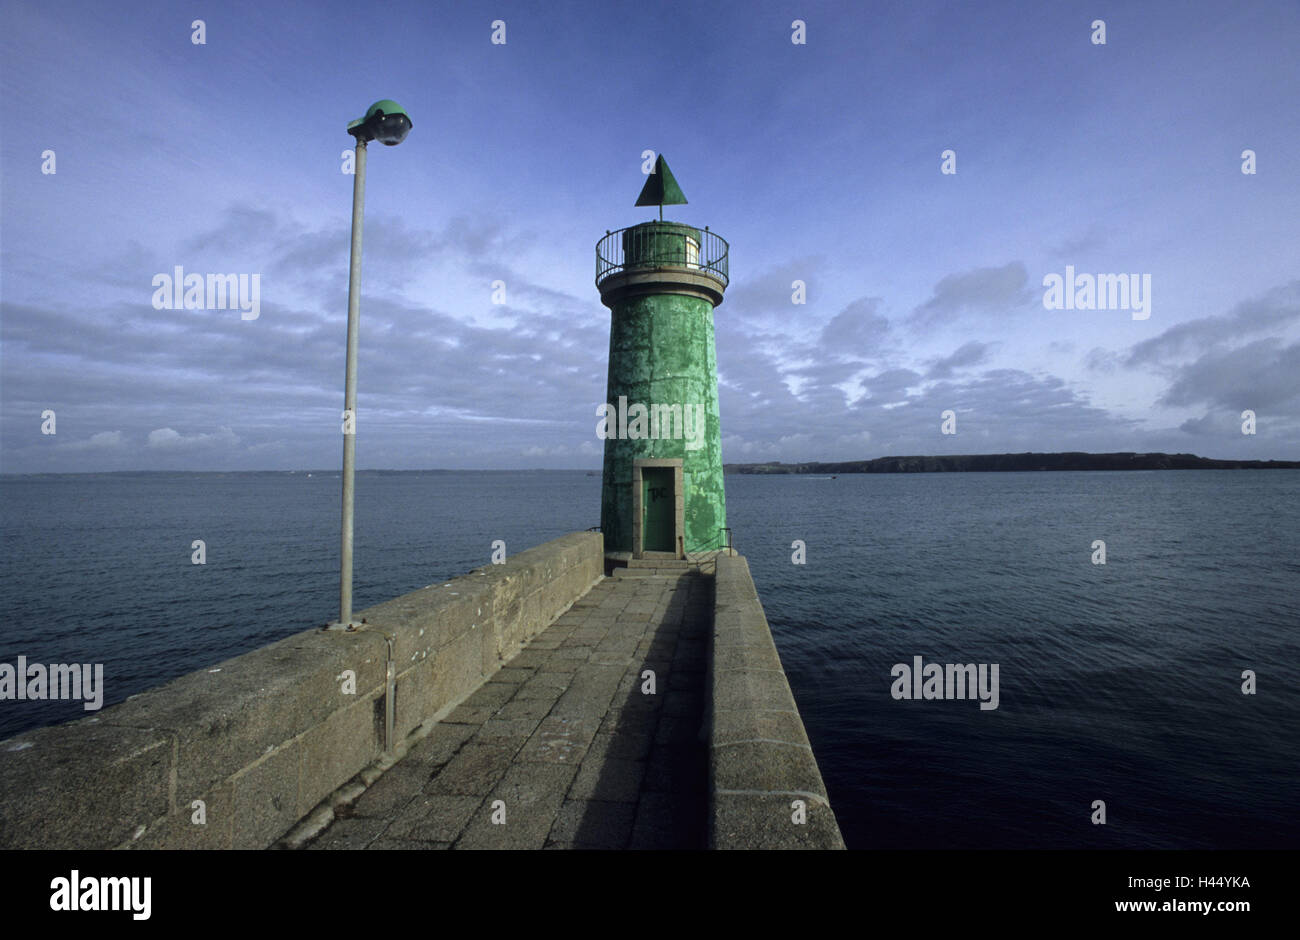 France, Brittany, Camaret sur Mer, harbour, lighthouse, port entrance, harbour defensive wall, tower, sea figure, navigation, beacon, selection, orientation, security, navigation, way, lamp, green, sea, water, coast, width, horizon, heaven, clouds, door, input, point, beautyful clouds, Stock Photo